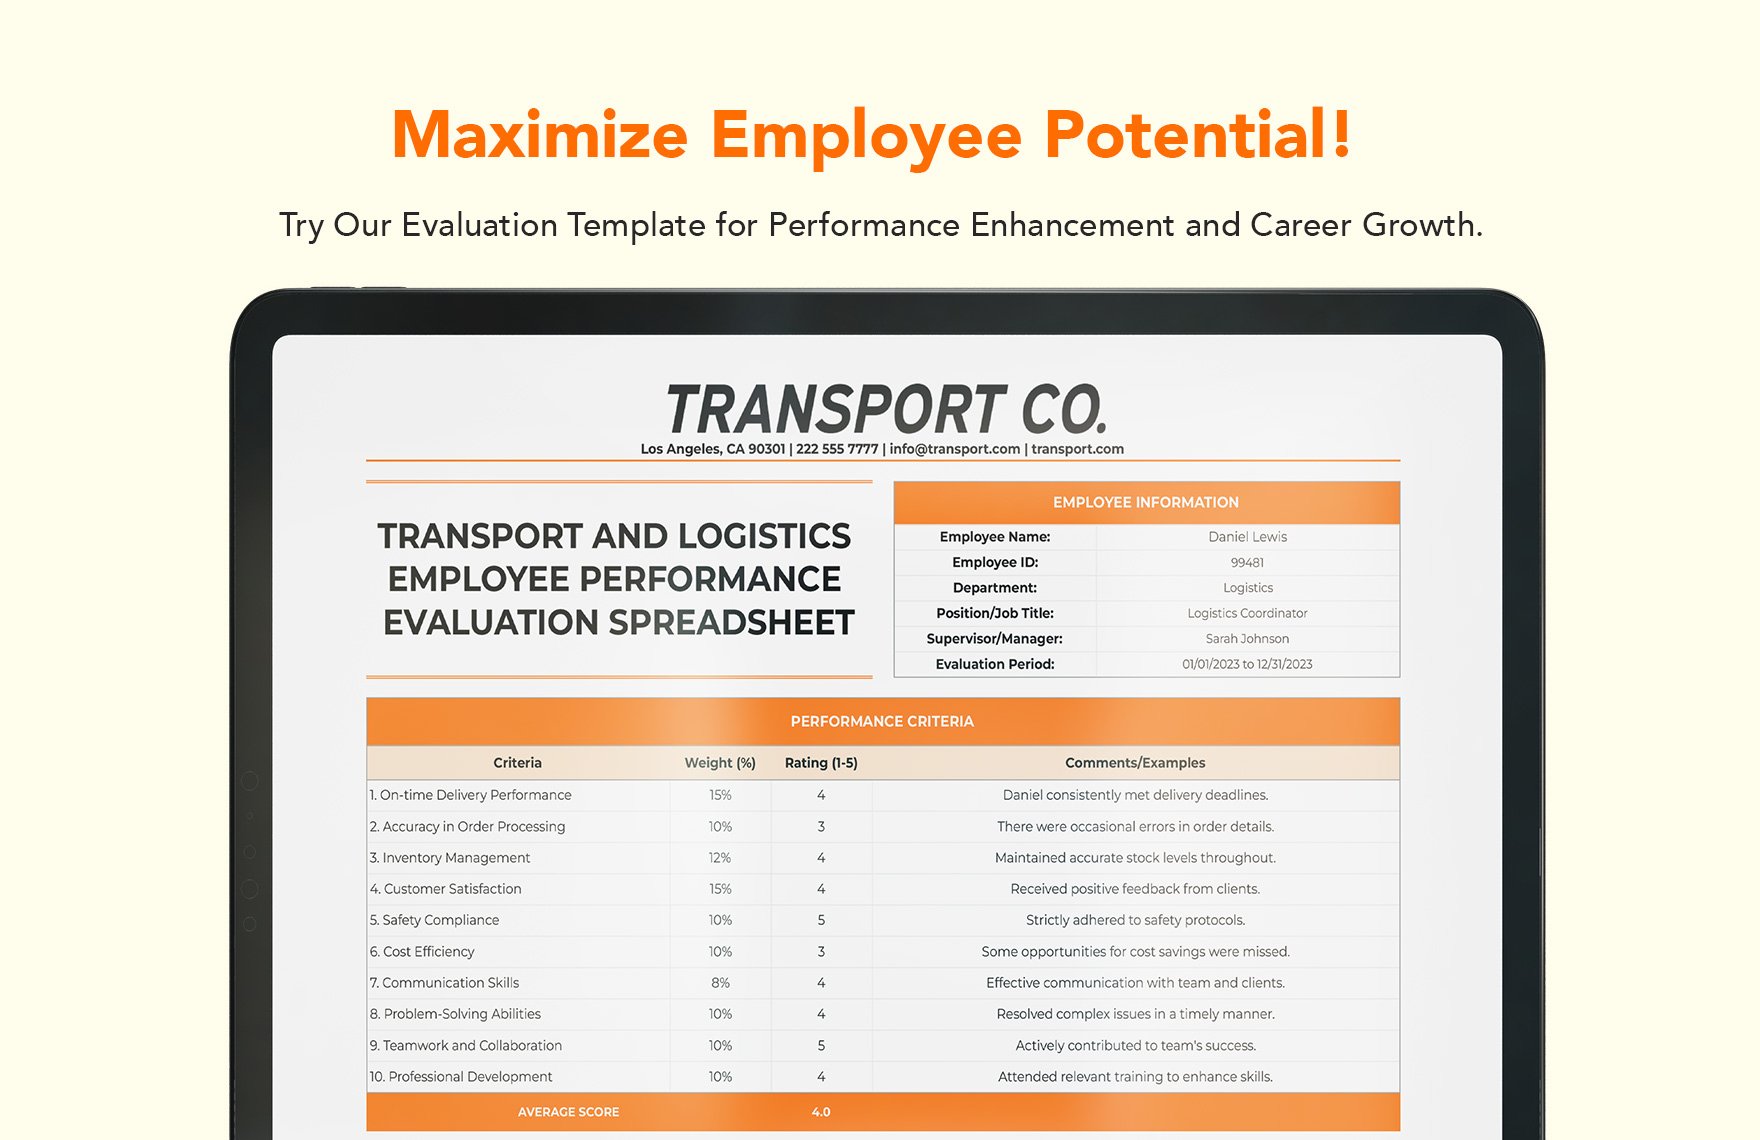 Transport and Logistics Employee Performance Evaluation Spreadsheet Template